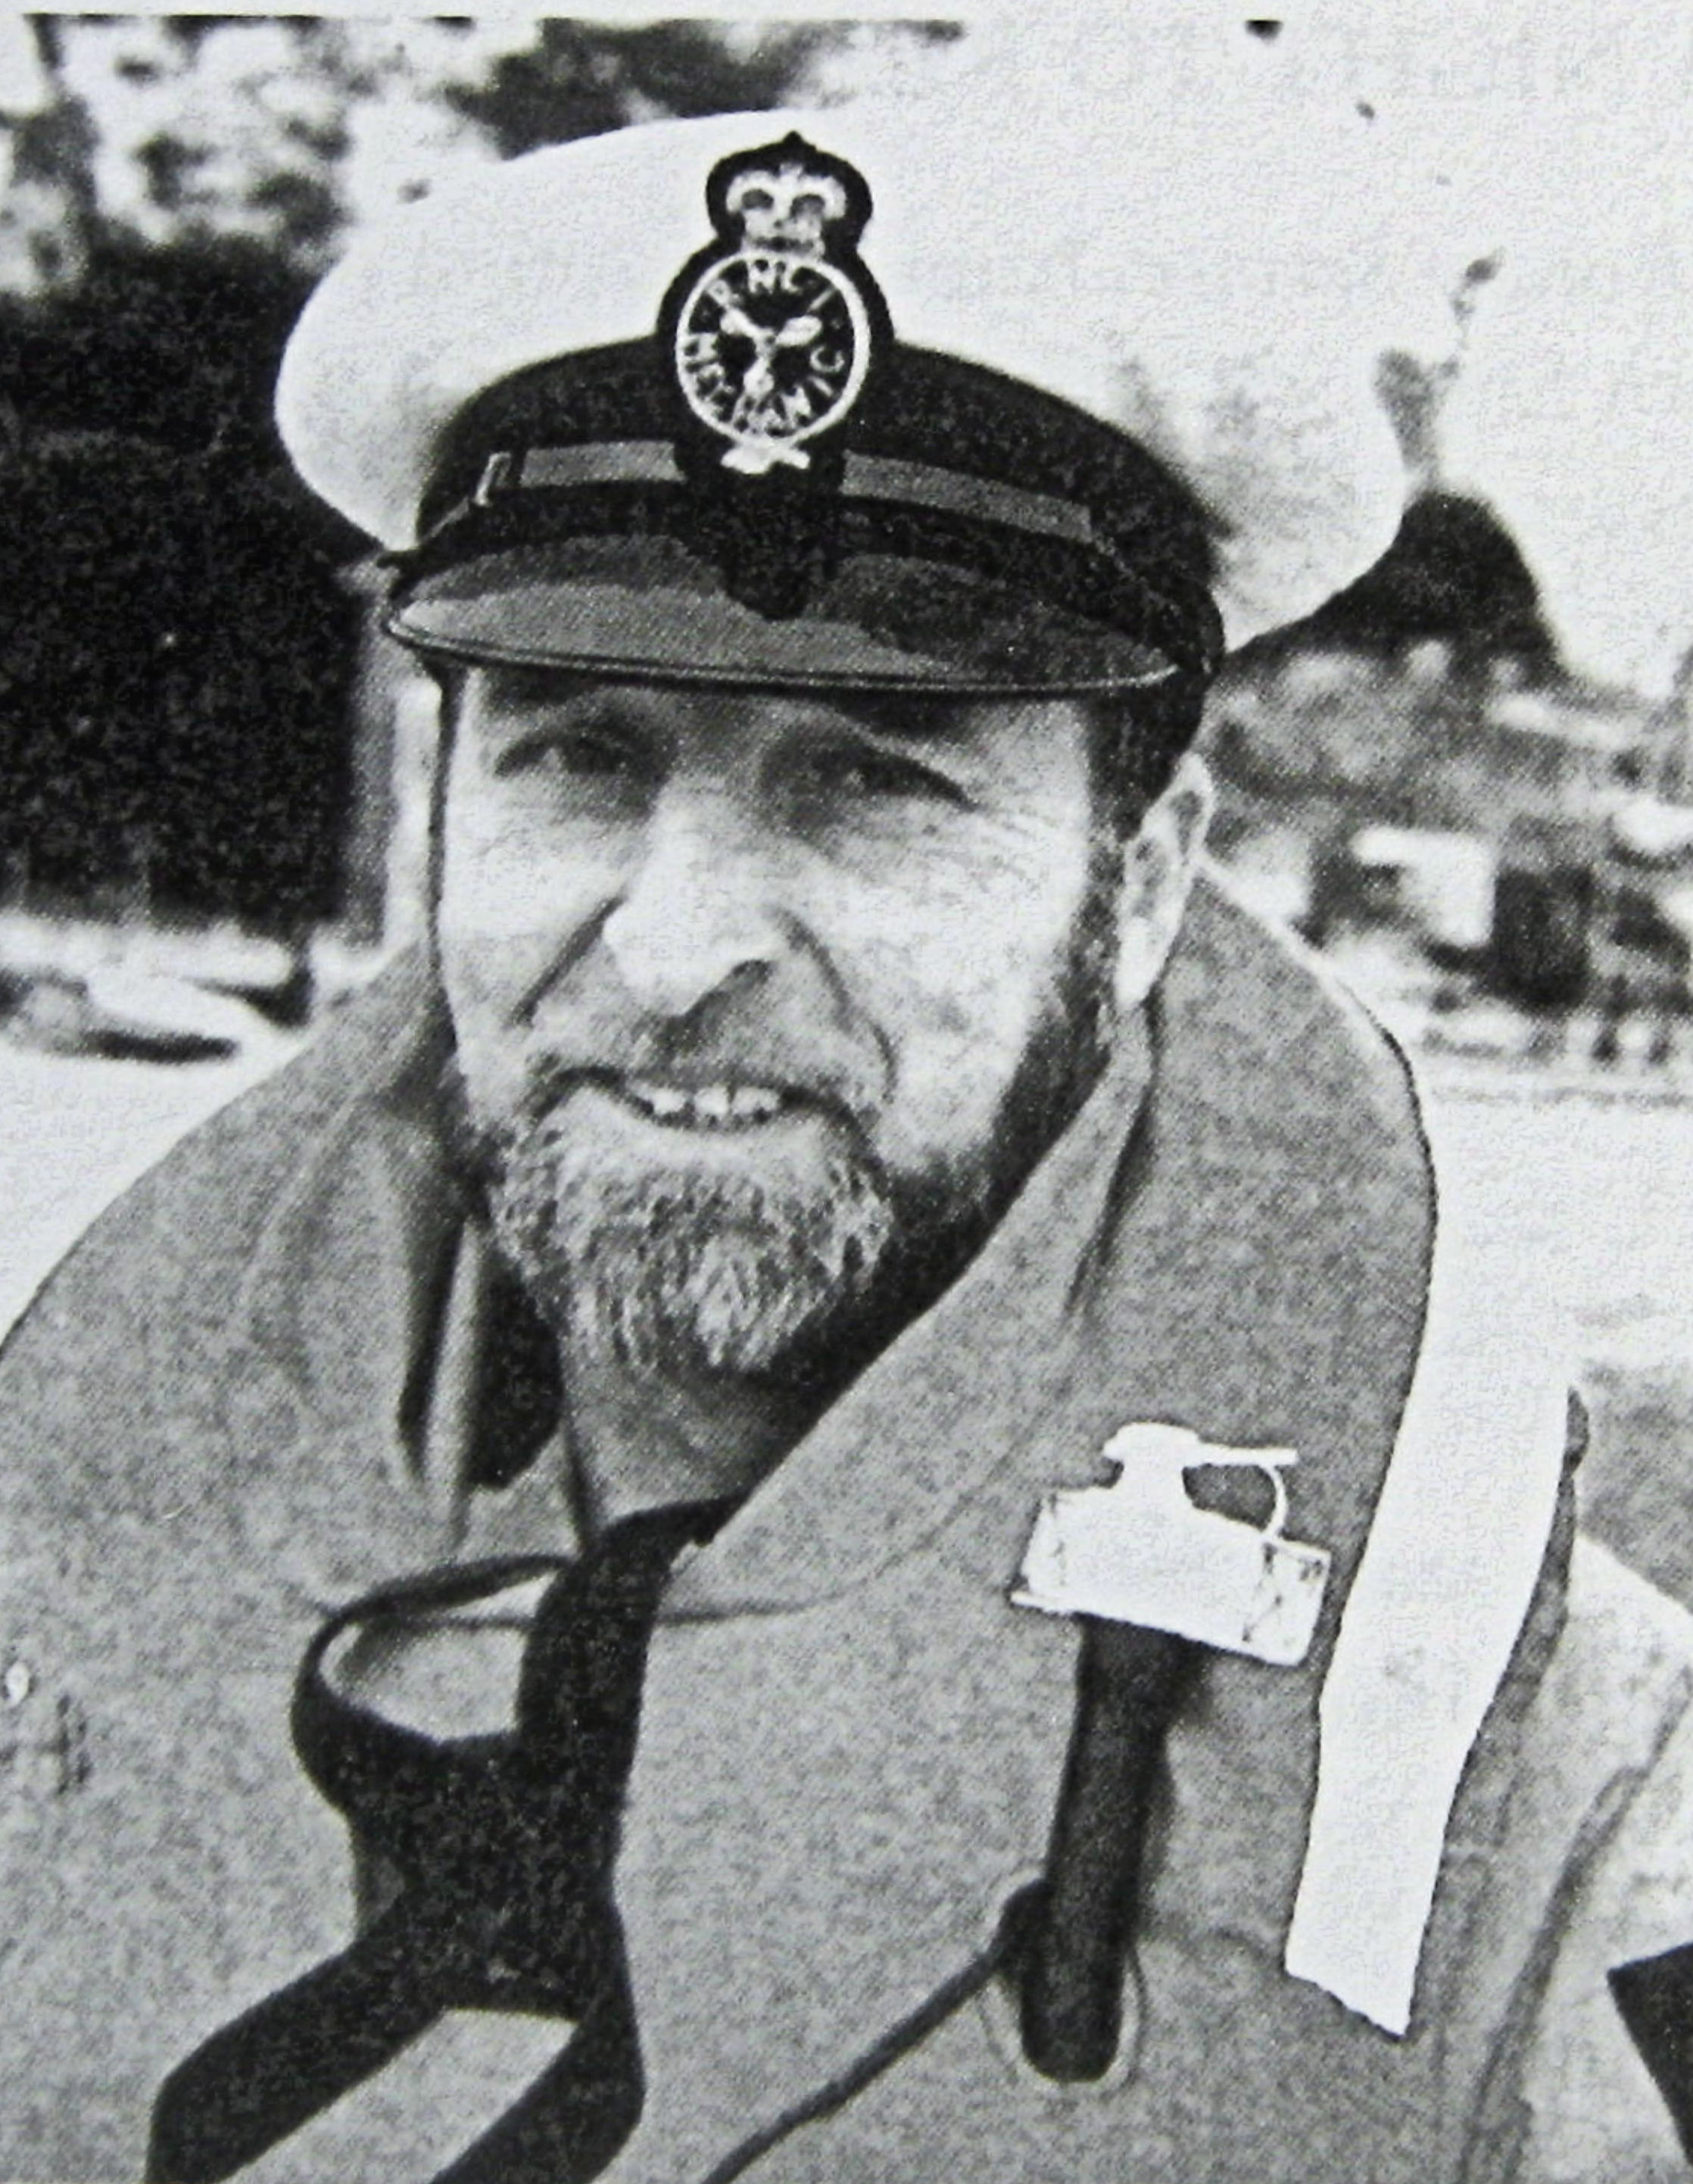 <b>Roy Couzens</b> - Lifeboat Second Coxswain Second Mechanic. Dover RNLI - th-couzens-roy-lifeboat-second-coxswain-second-mechanic